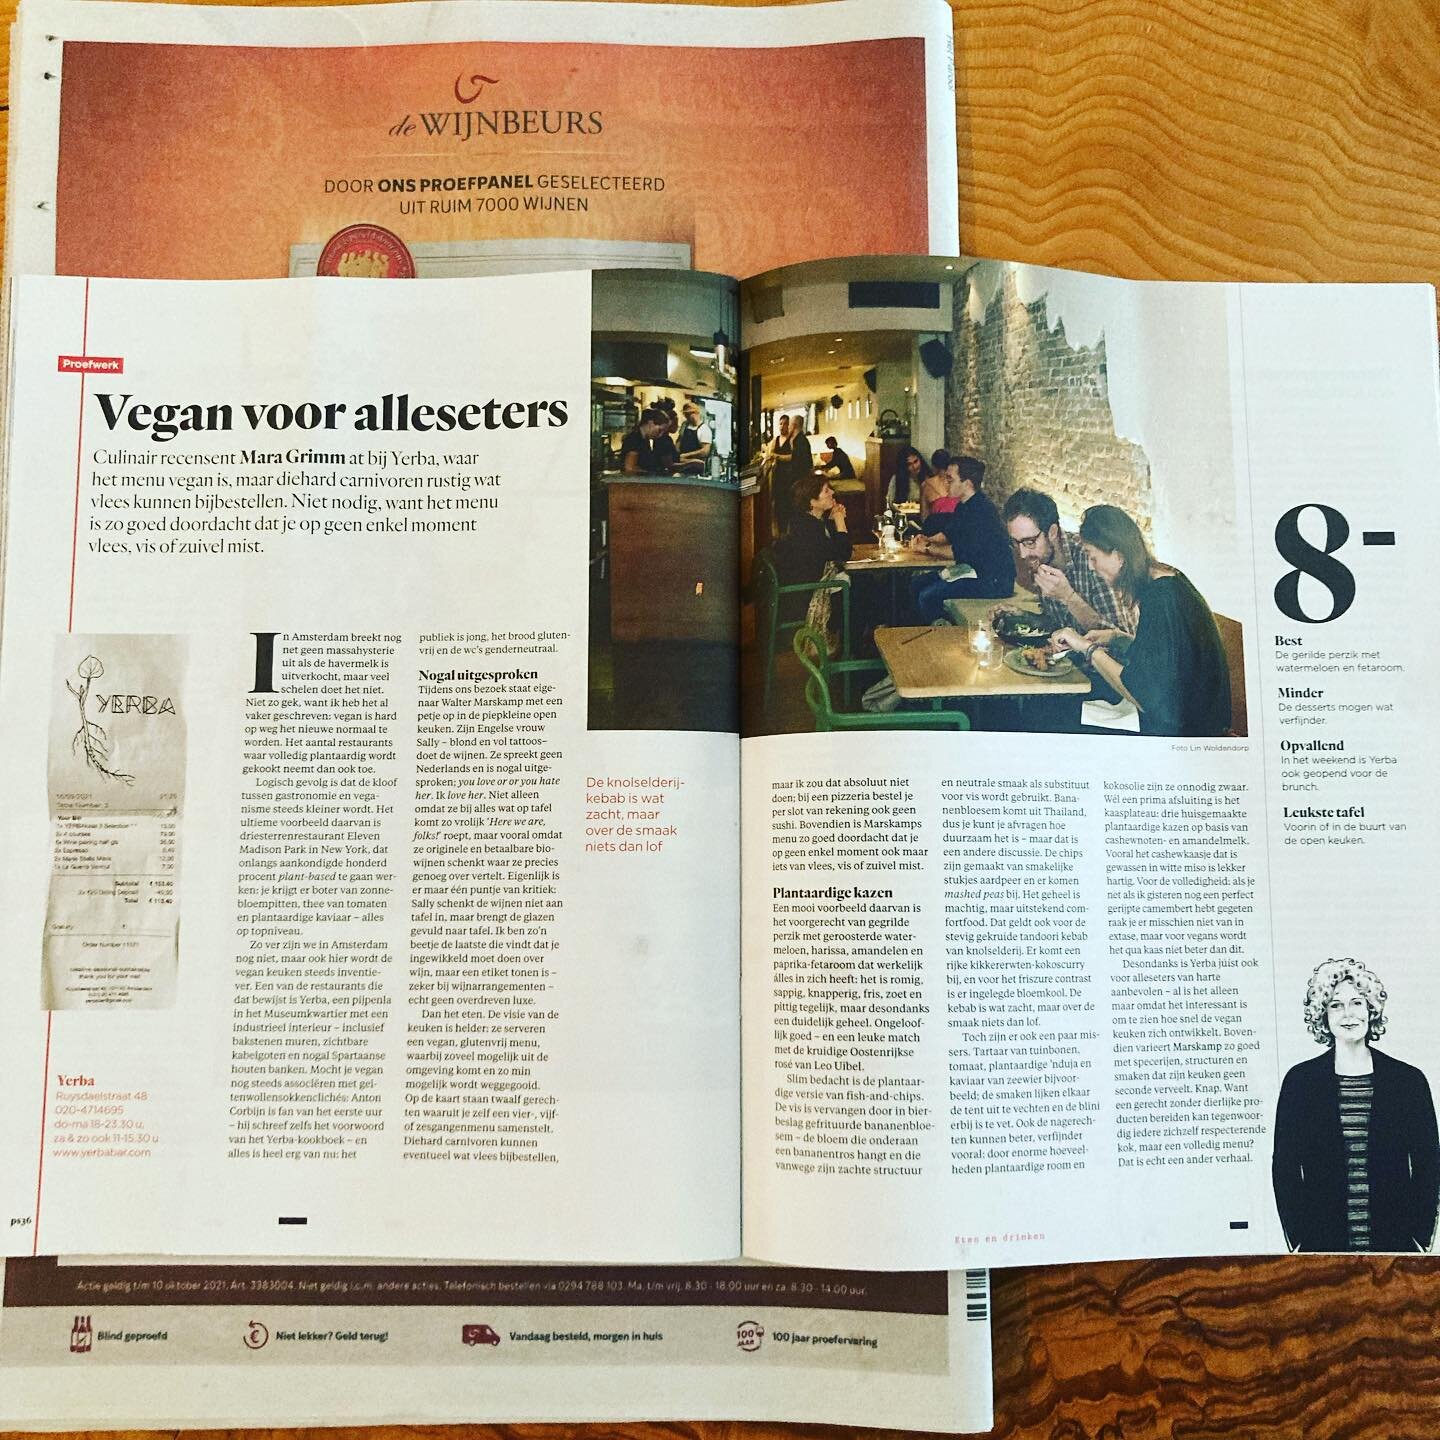 Congrats to @yerbarestaurant for getting a brilliant review in the @hetparool @pshetparool our amazing partners, Chef and Somm couple  @wklinky @wandering.sal83 are doing an outstanding job at pushing the needle in educating our customers and reviewe